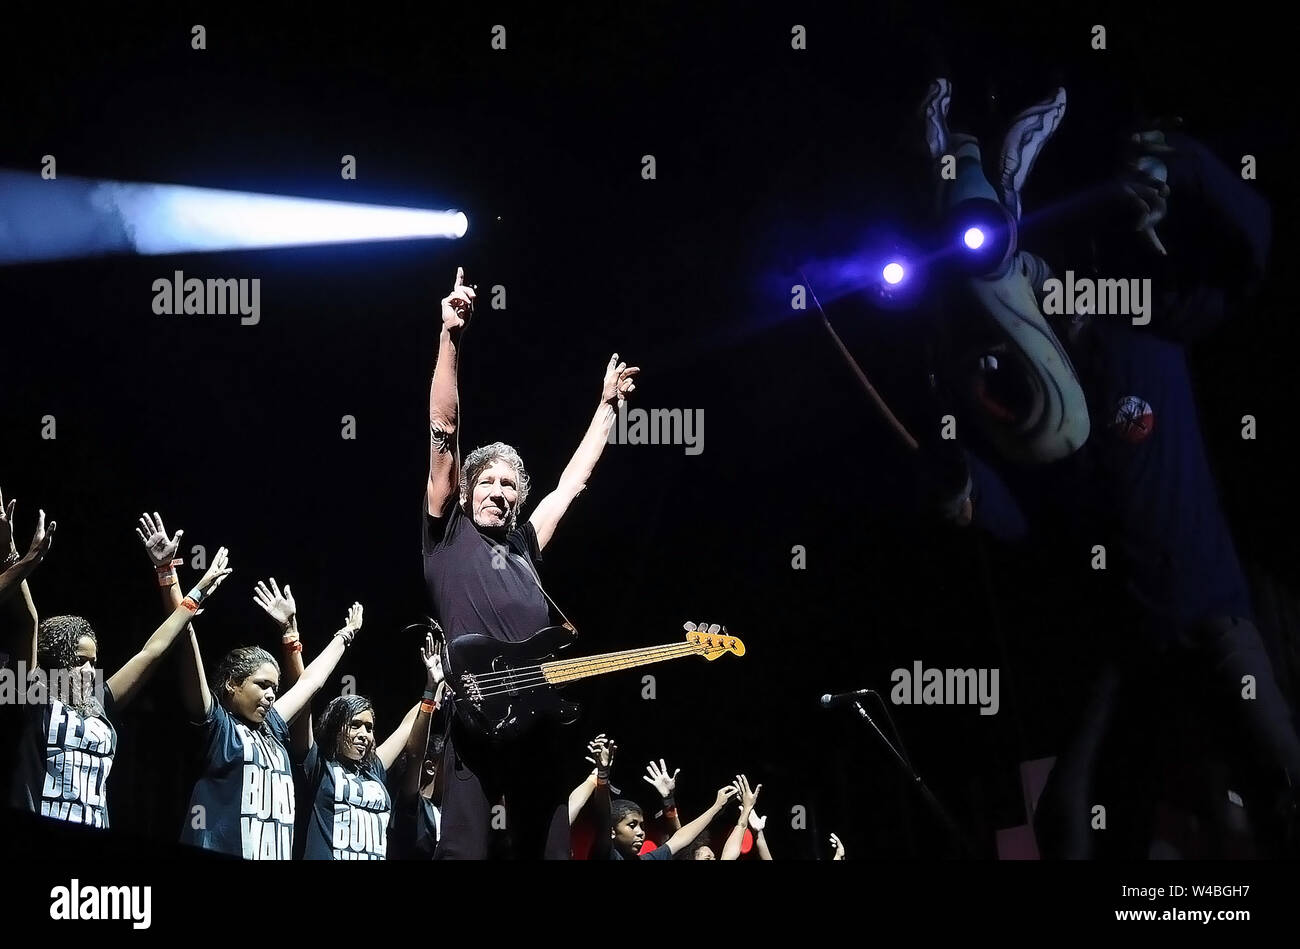 Singer Roger Waters, during his show at Engenhão Stadium, in the city of Rio de Janeiro, Brazil Stock Photo